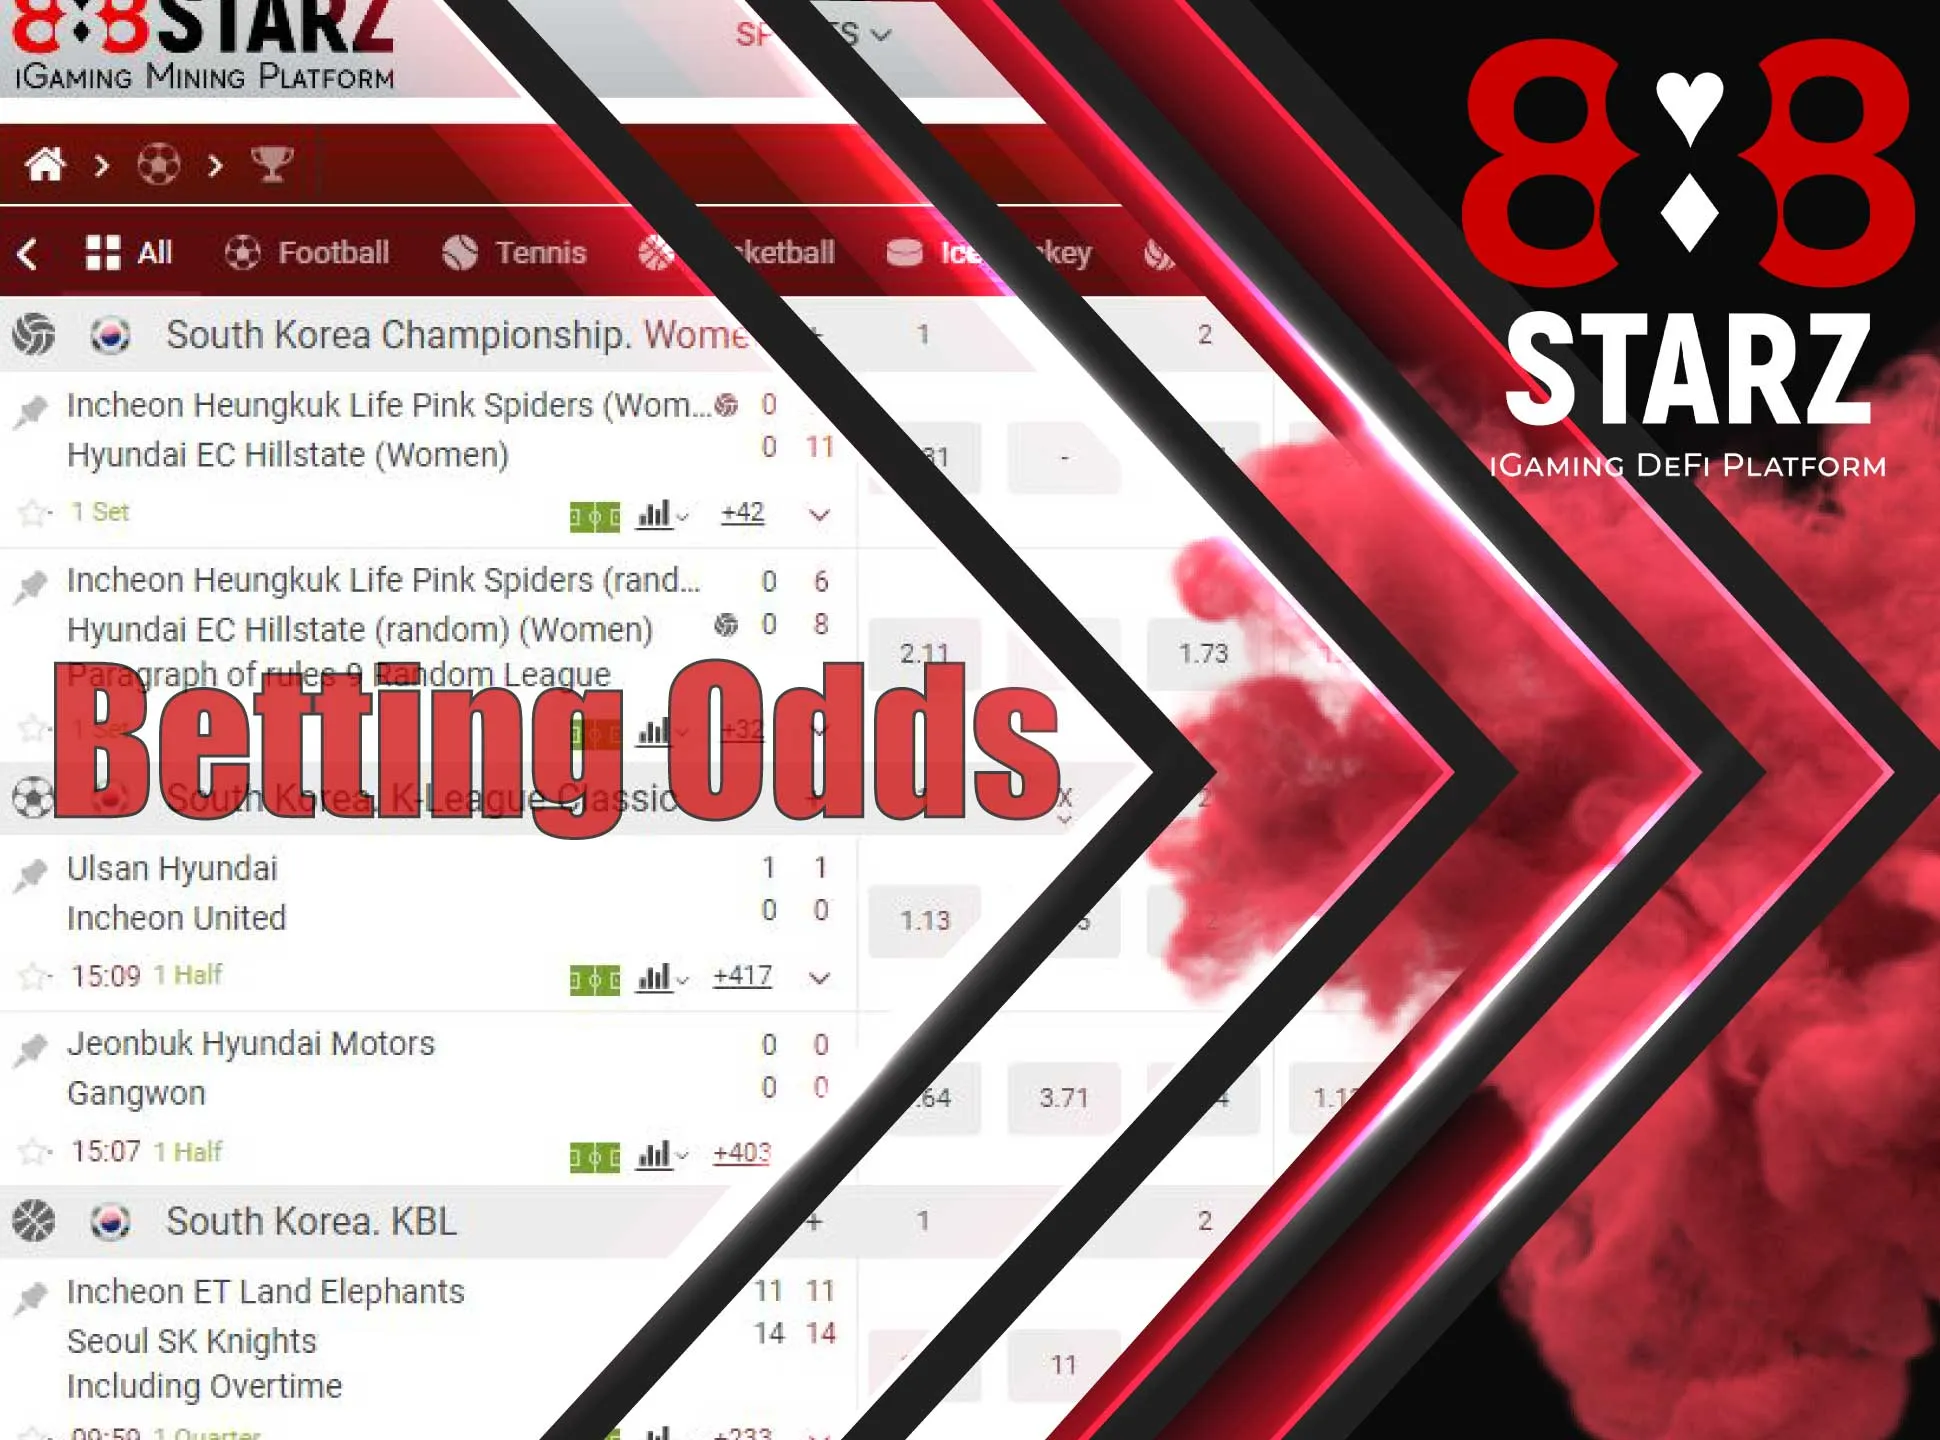 888starz has profitable odds for various sports markets.